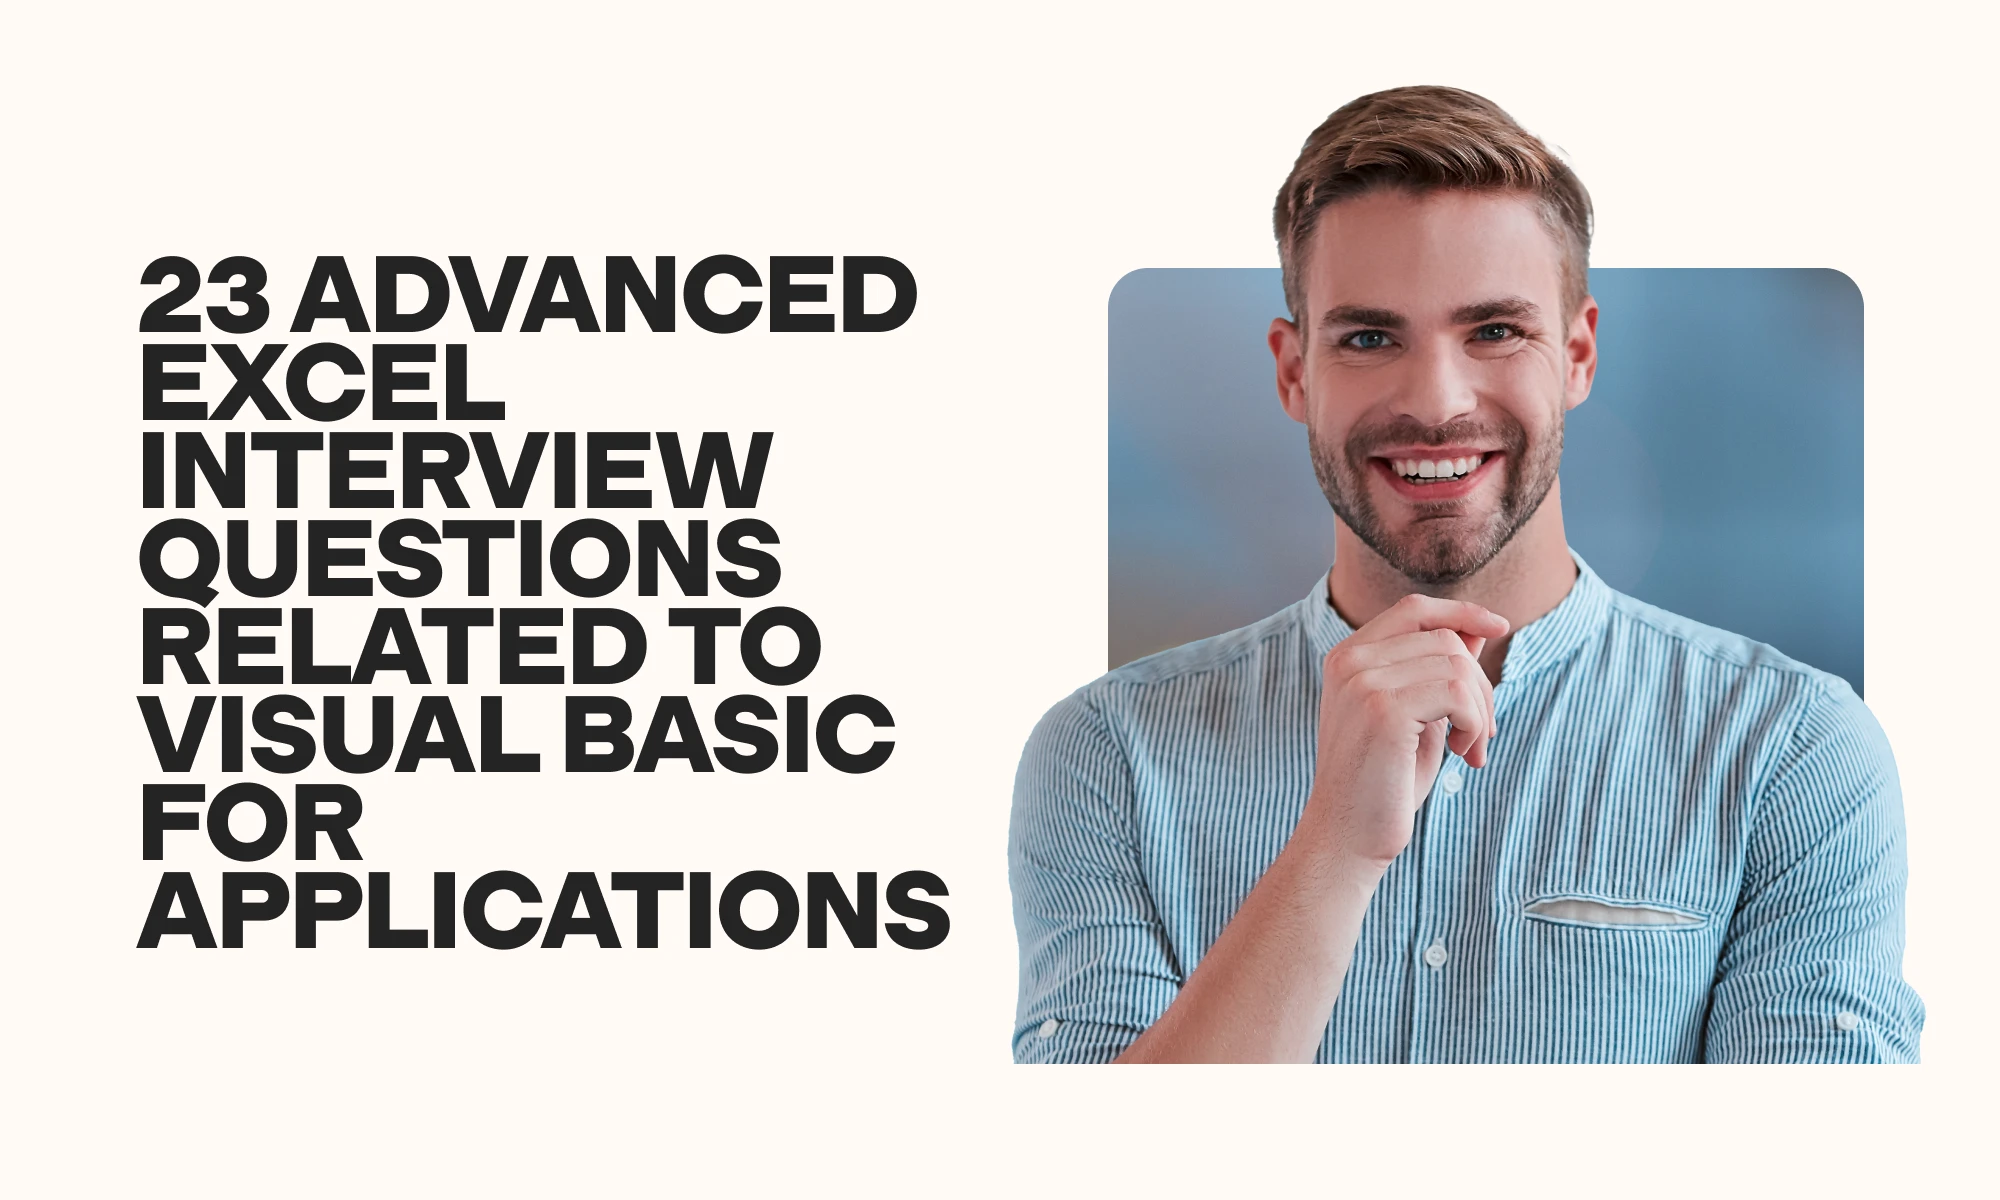 image showing advanced Excel interview questions related to Visual Basic for Applications